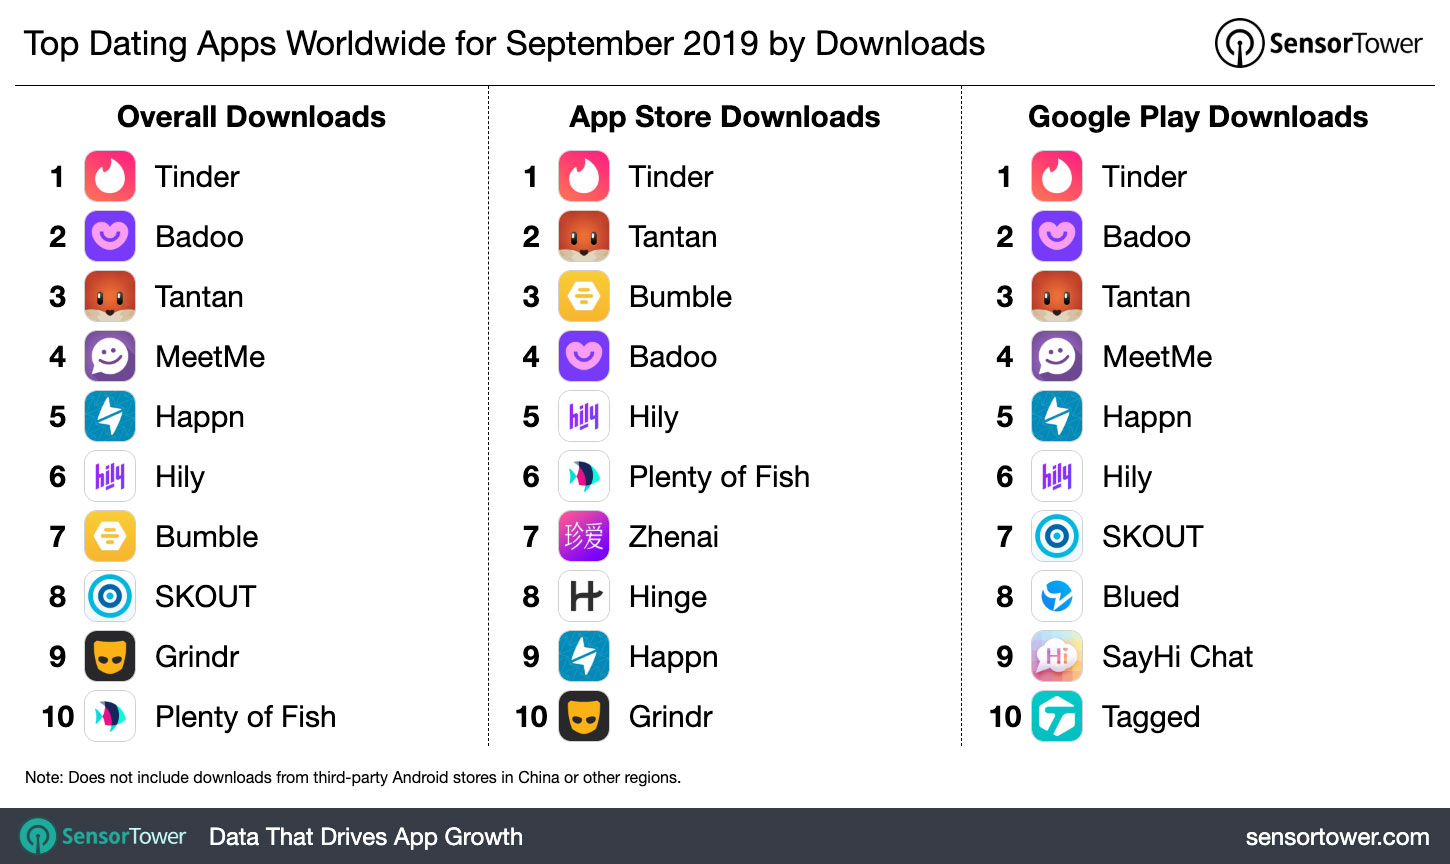 Top Dating Apps Worldwide for September 2019 by Downloads